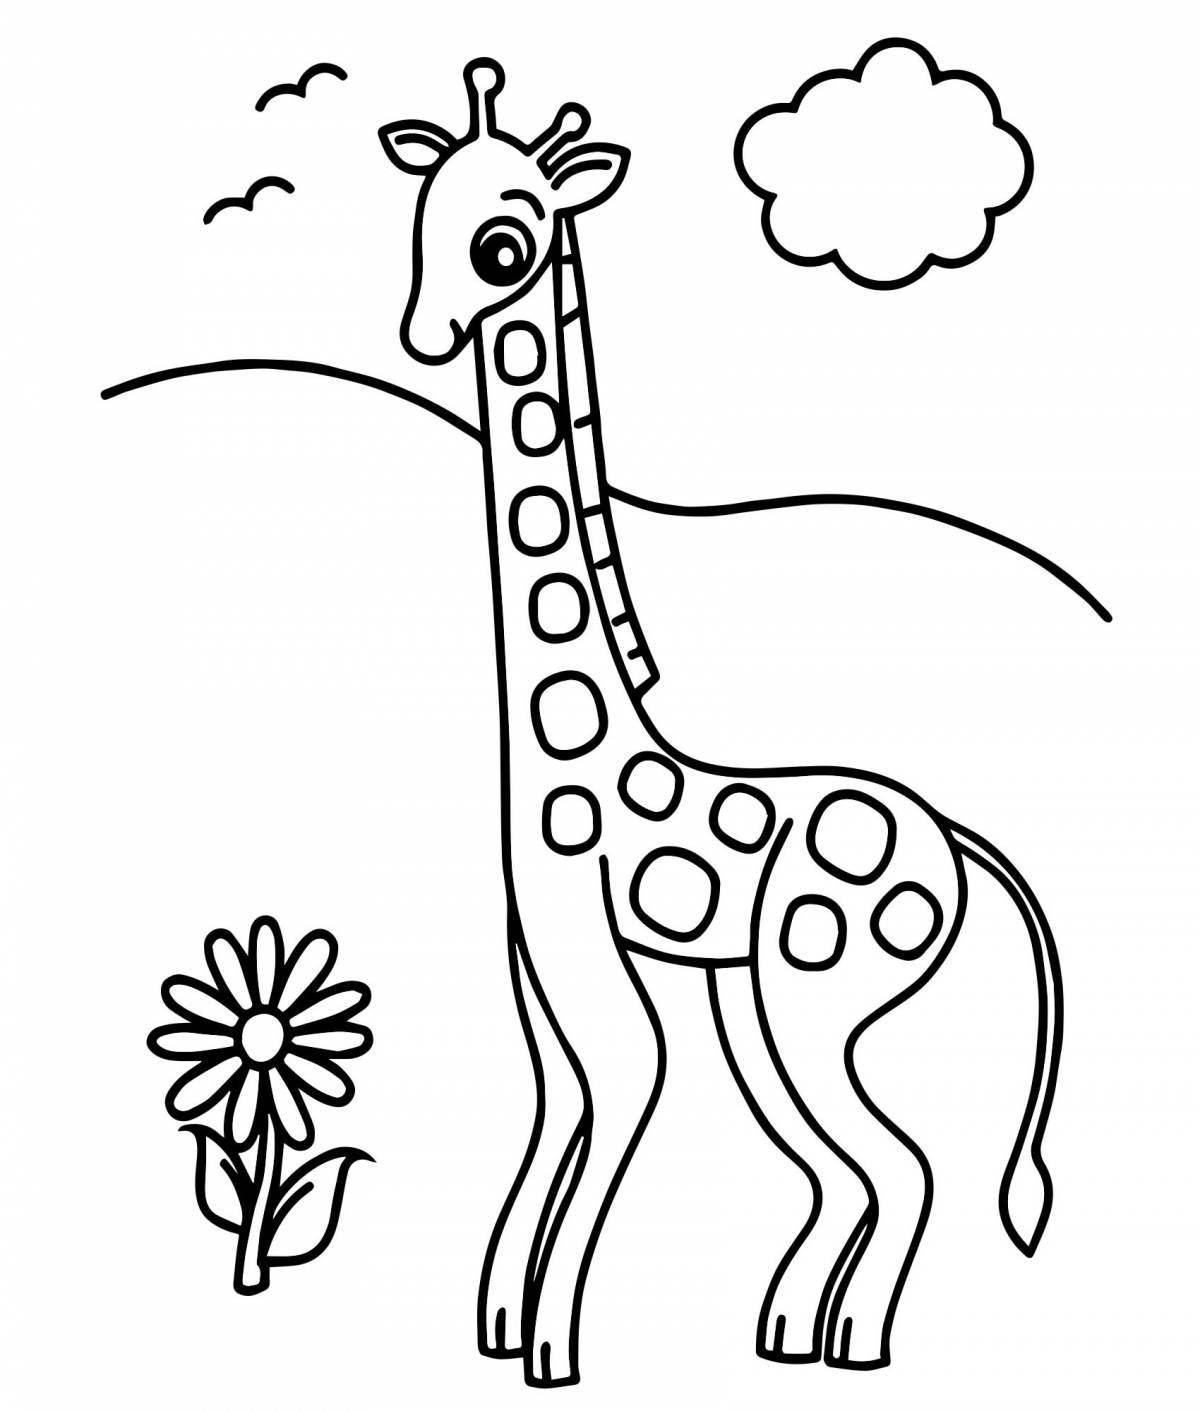 Adorable giraffe coloring book for 2-3 year olds